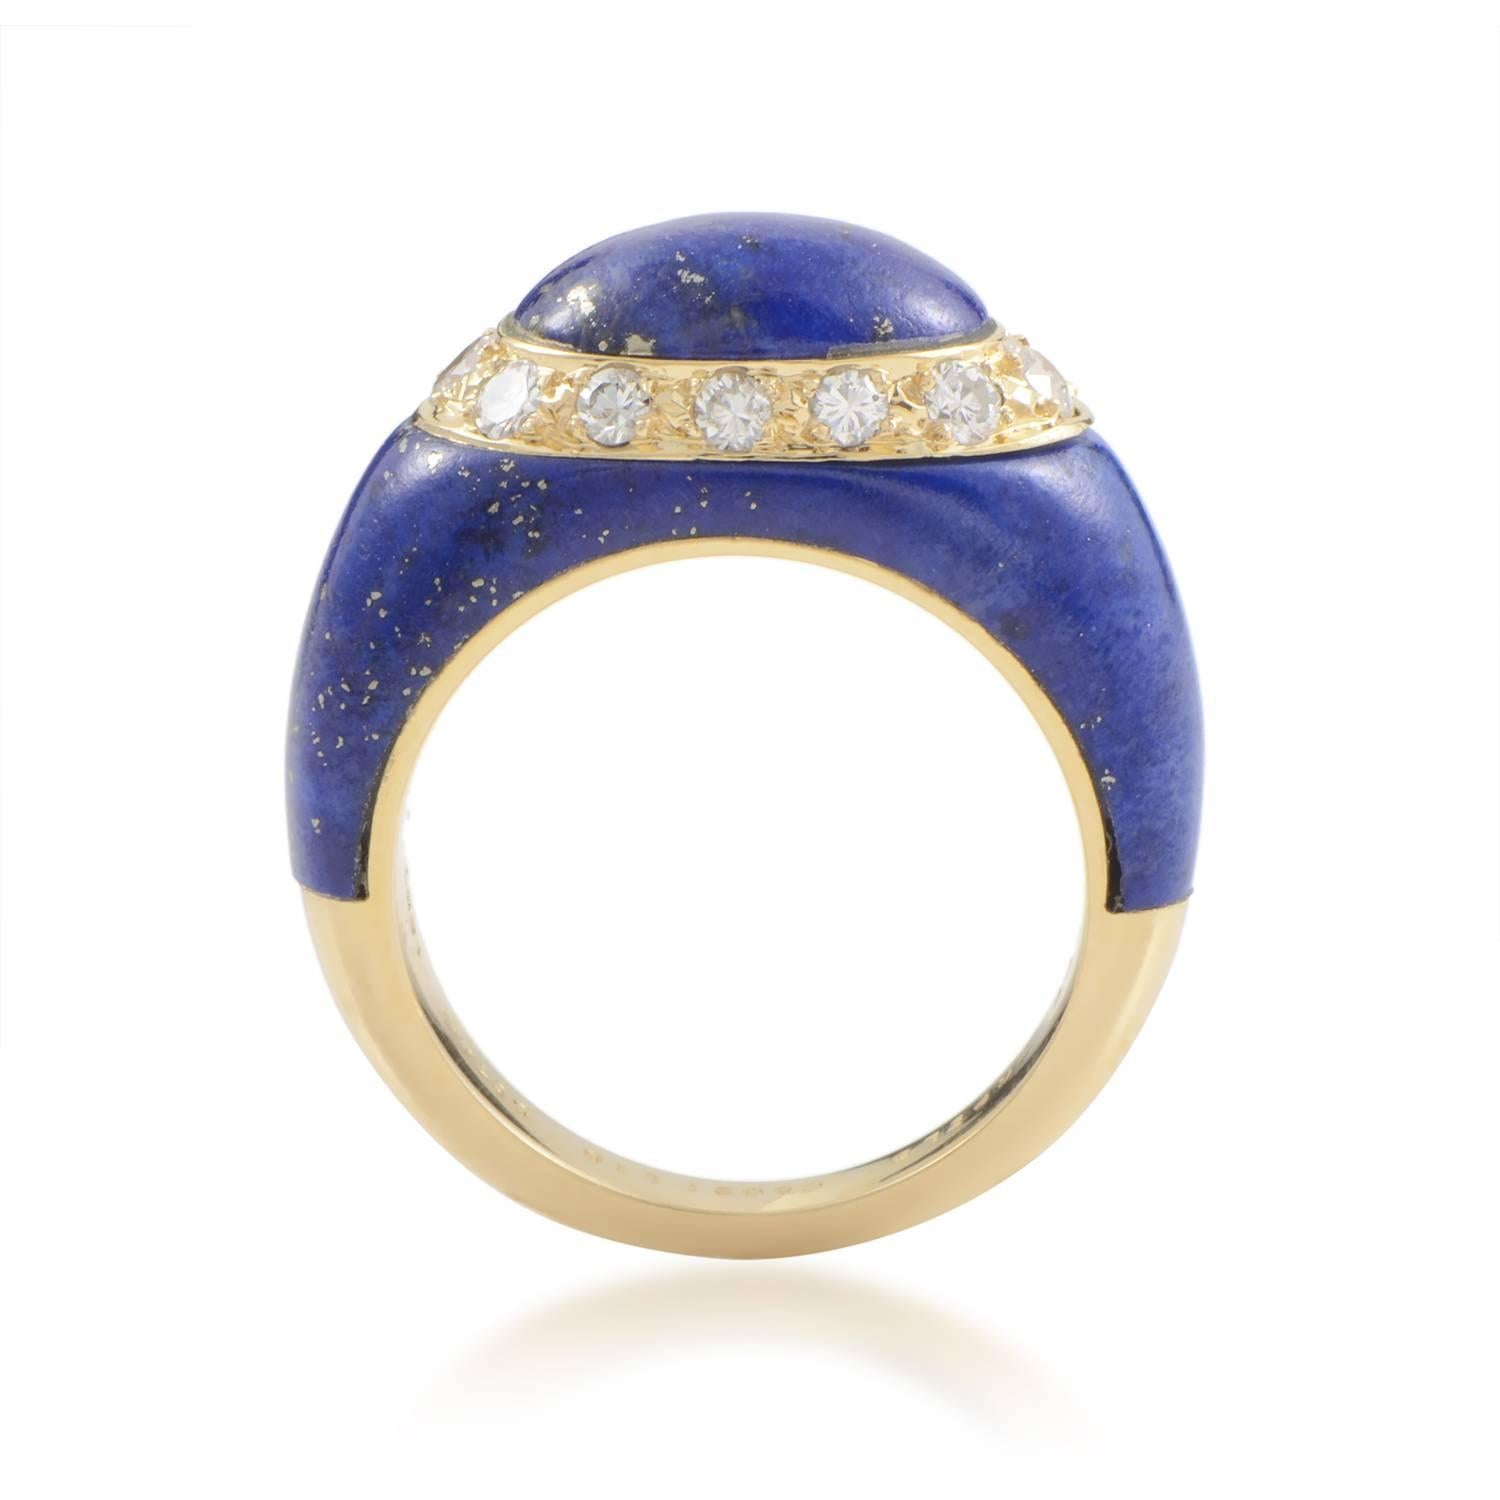 Beautiful blue lapis and .22ct of glistening white diamonds come together in this gorgeous design from Van Cleef & Arpels. The ring is made of 18K yellow gold and boasts a domed shape that is very eye-catching.
Ring Size: 6.0 (51 1/2)
Ring Top